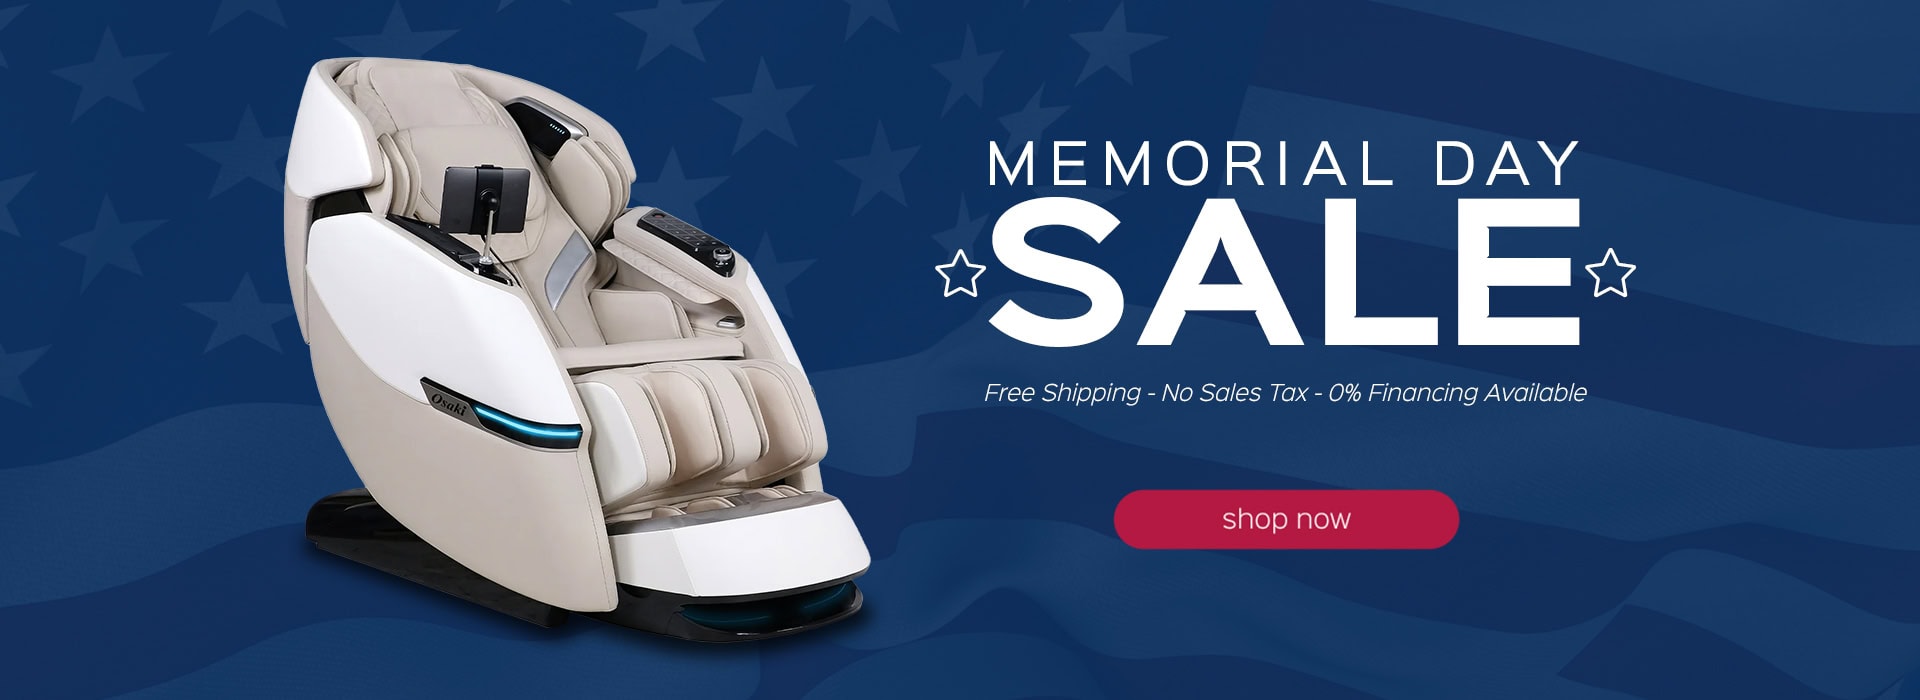 Memorial Day Sale - Save Thousands are Massage Chairs1621243260e1af0c20-0